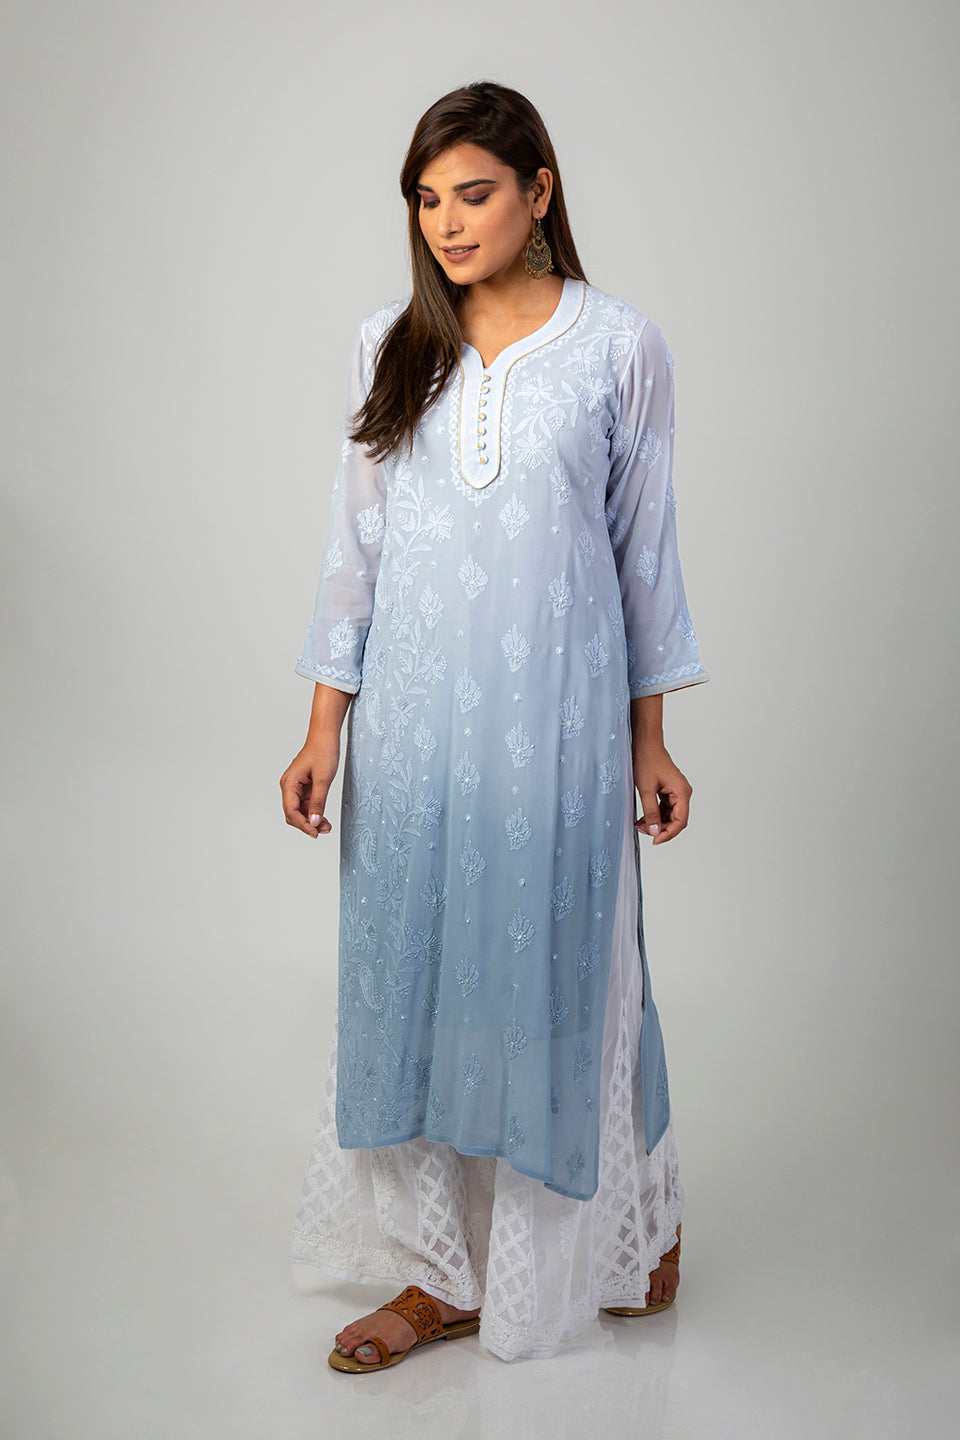 Source Chikan Embroidery Kurti Tunic Dress for Women from India on  m.alibaba.com